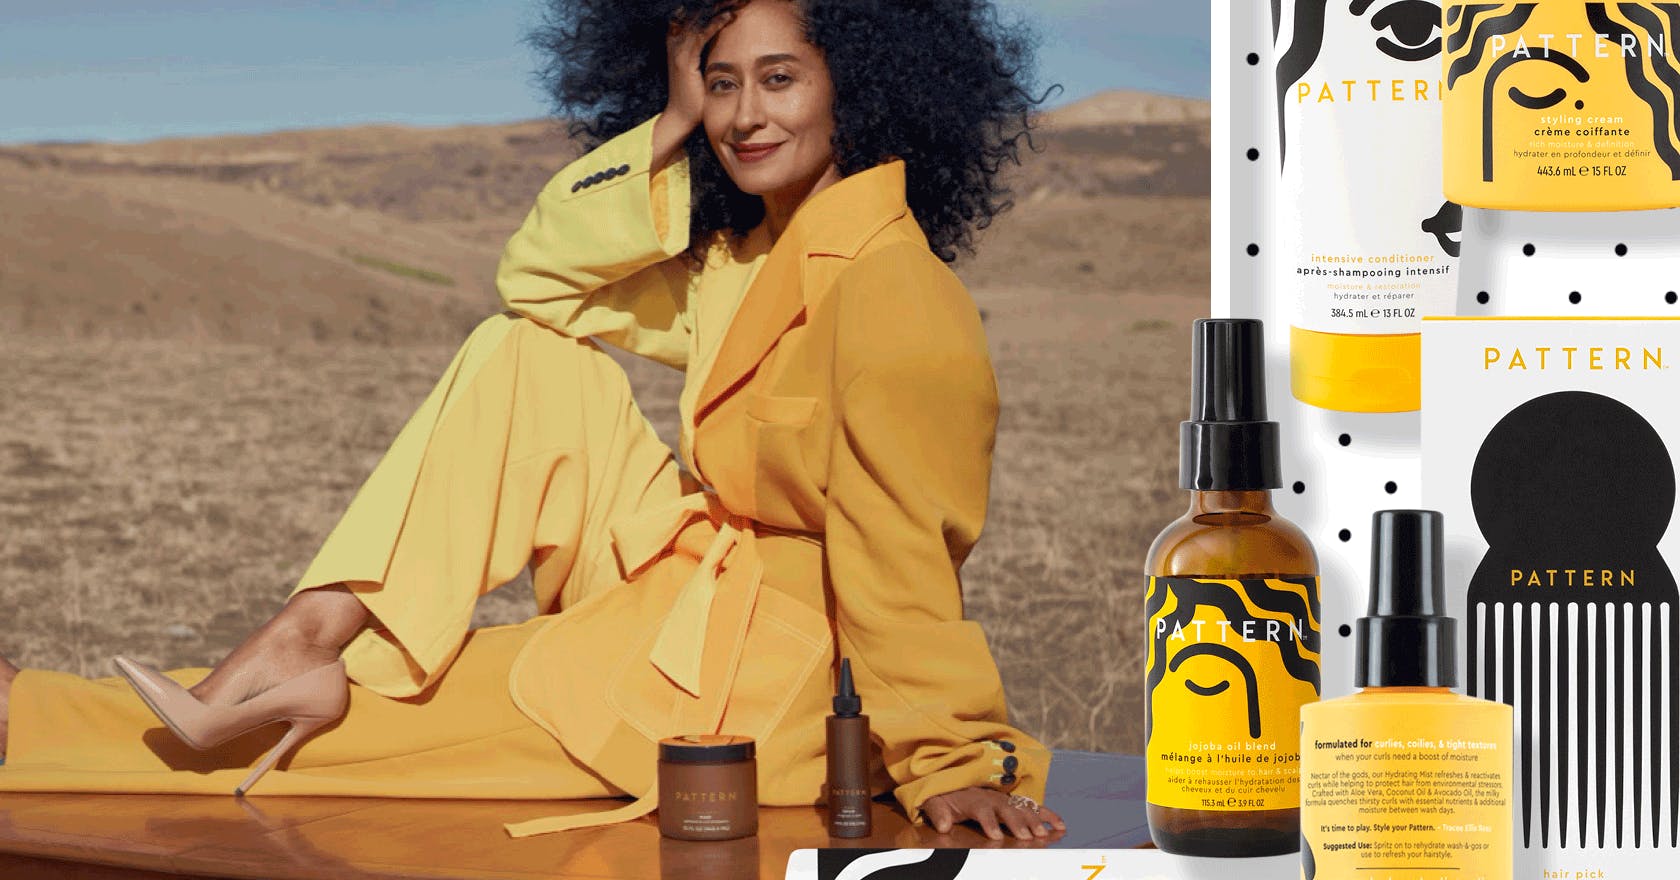 Tracee Ellis Ross’s Pattern Beauty is now available in the UK